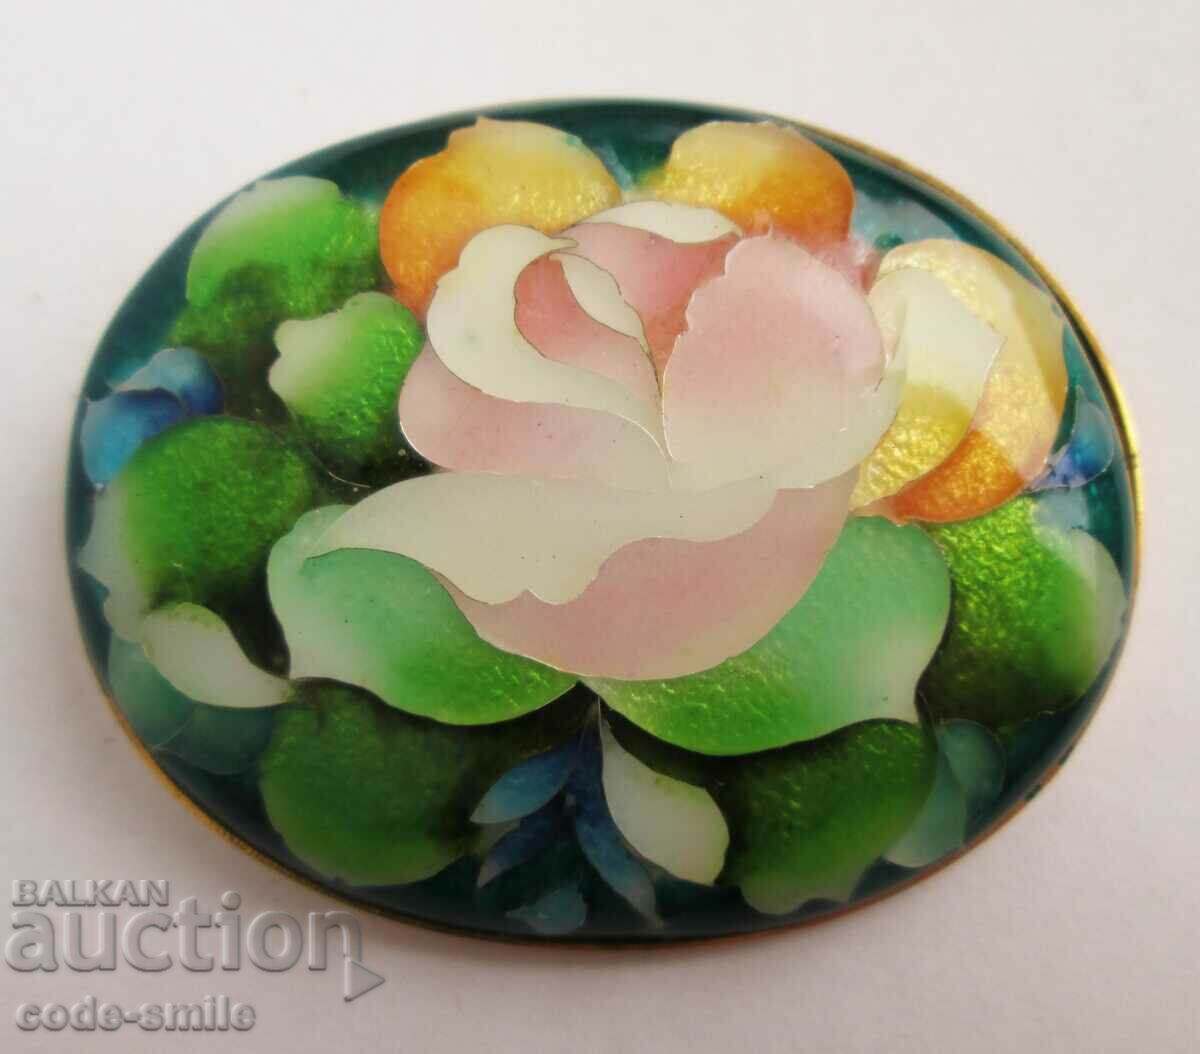 Unique floral women's brooch with painted enamel and gilding